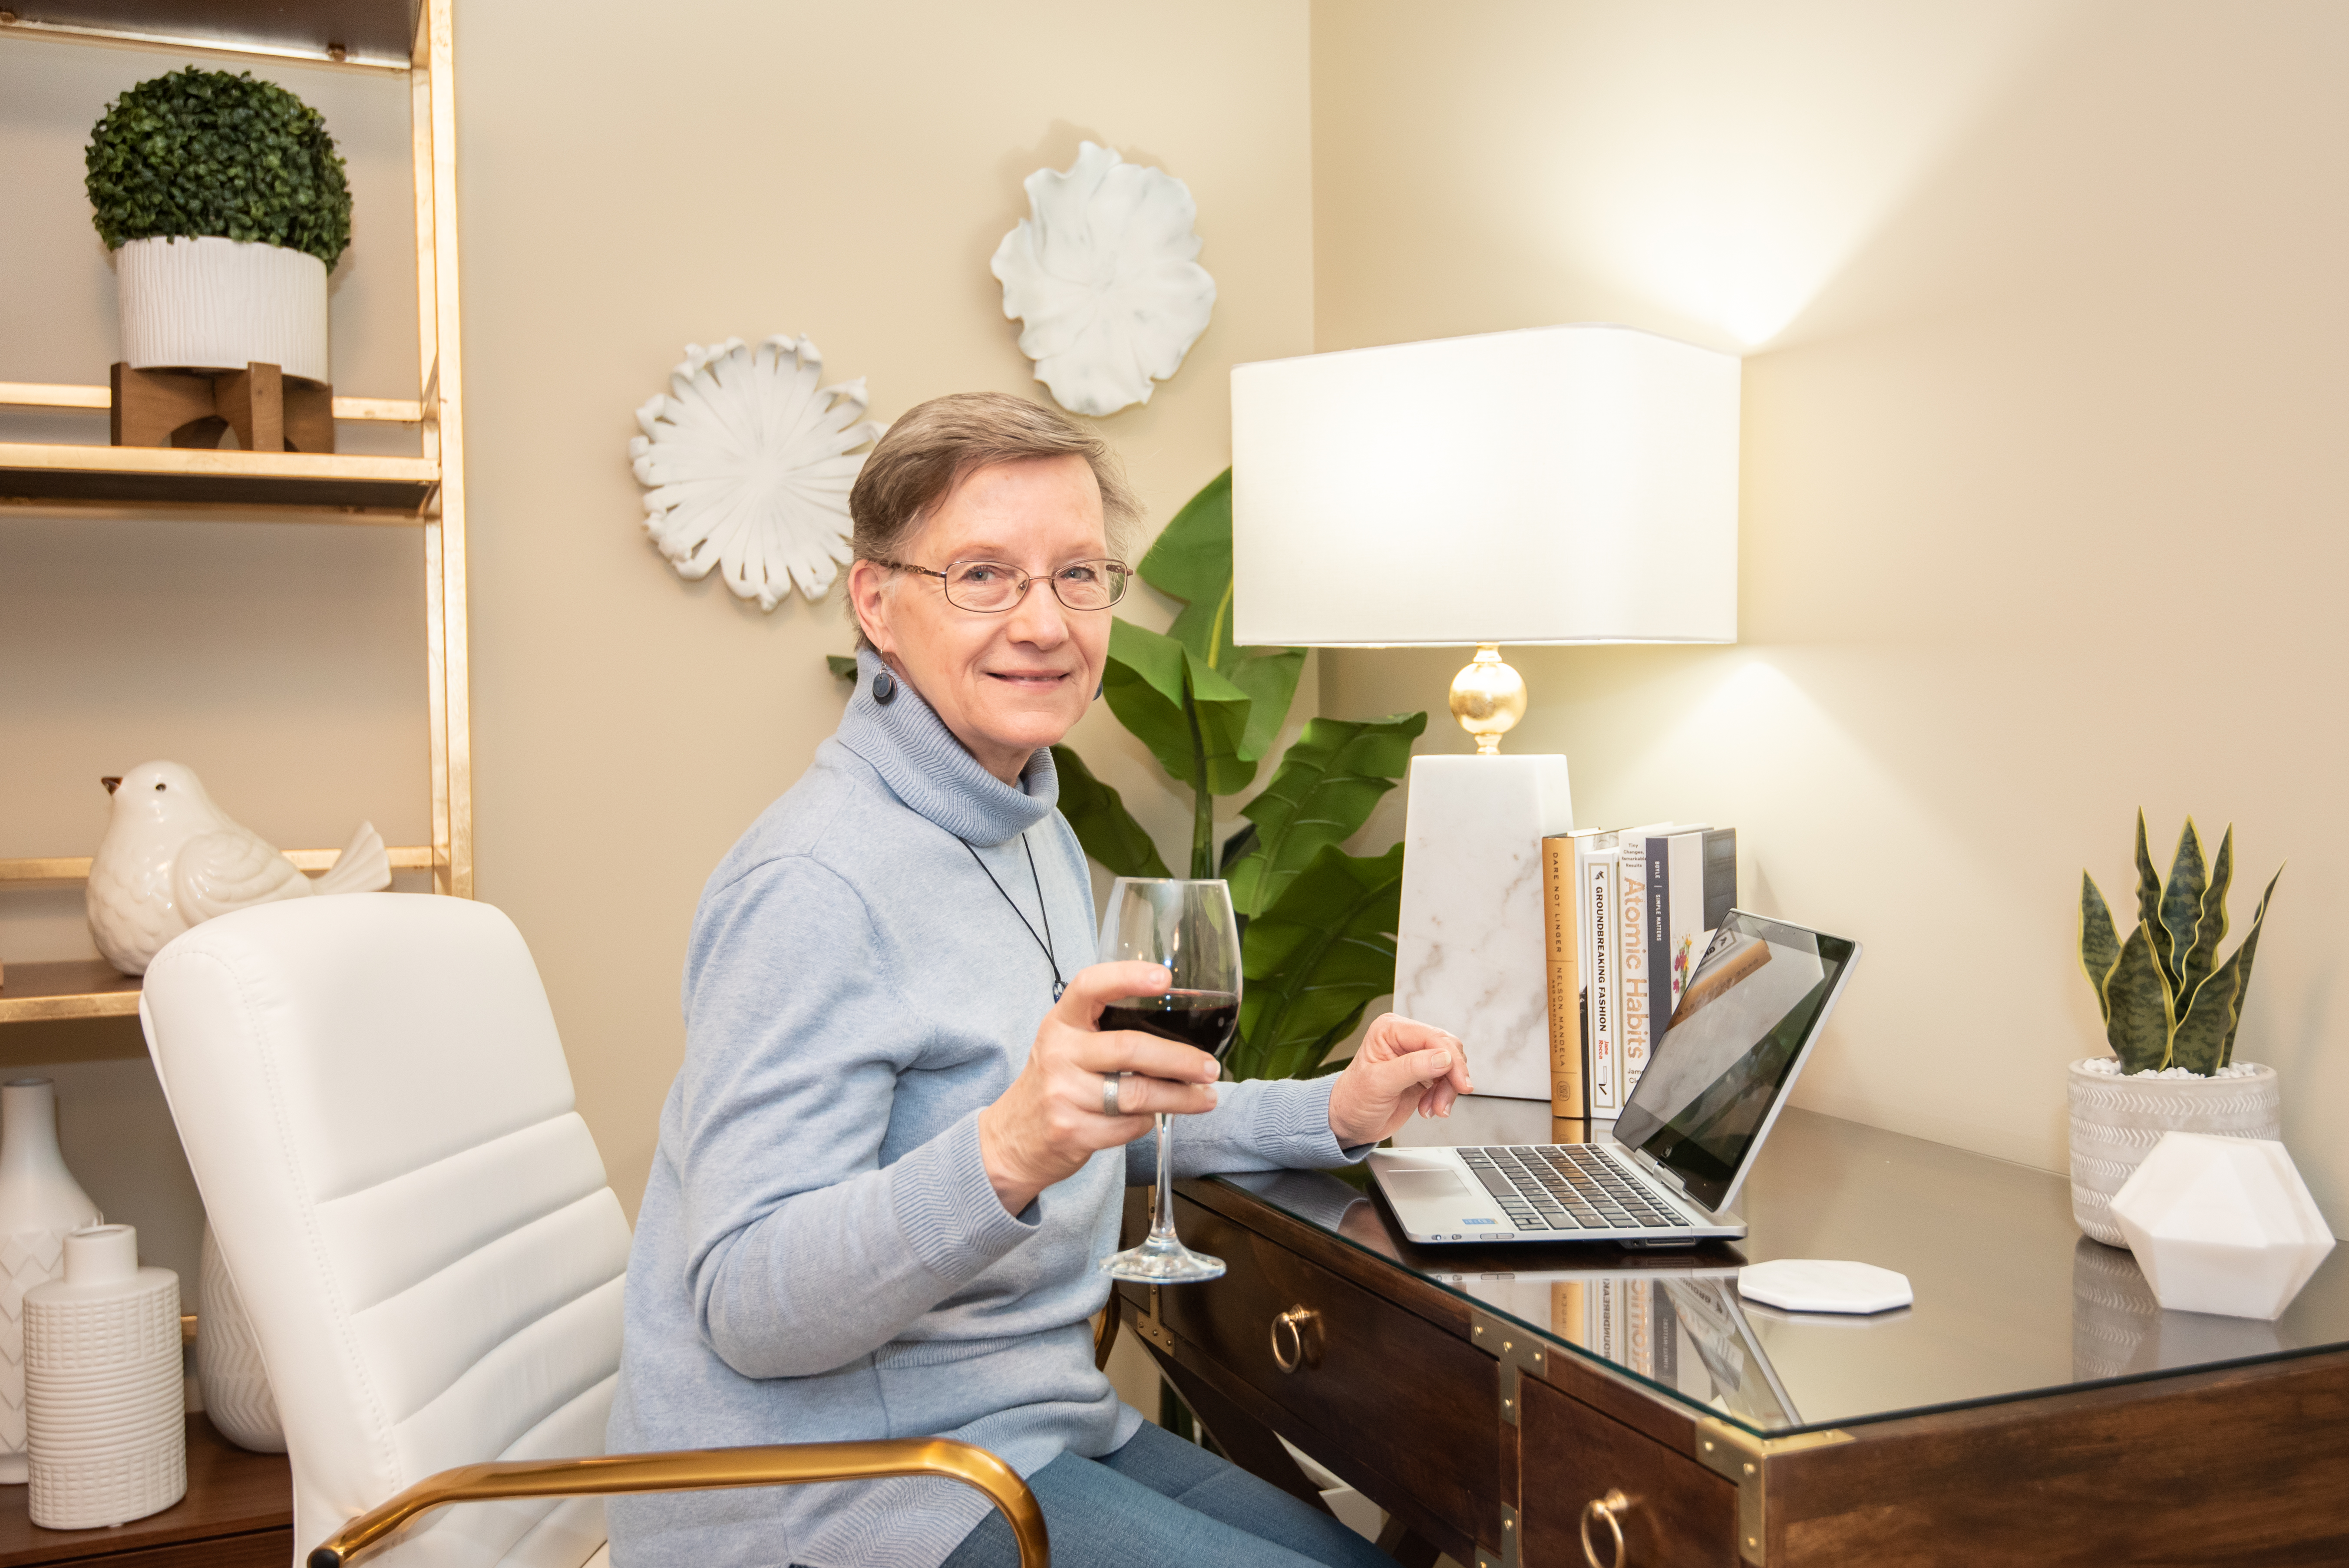 Resident enjoying a glass of wine in her Independent Living apartment at her desk